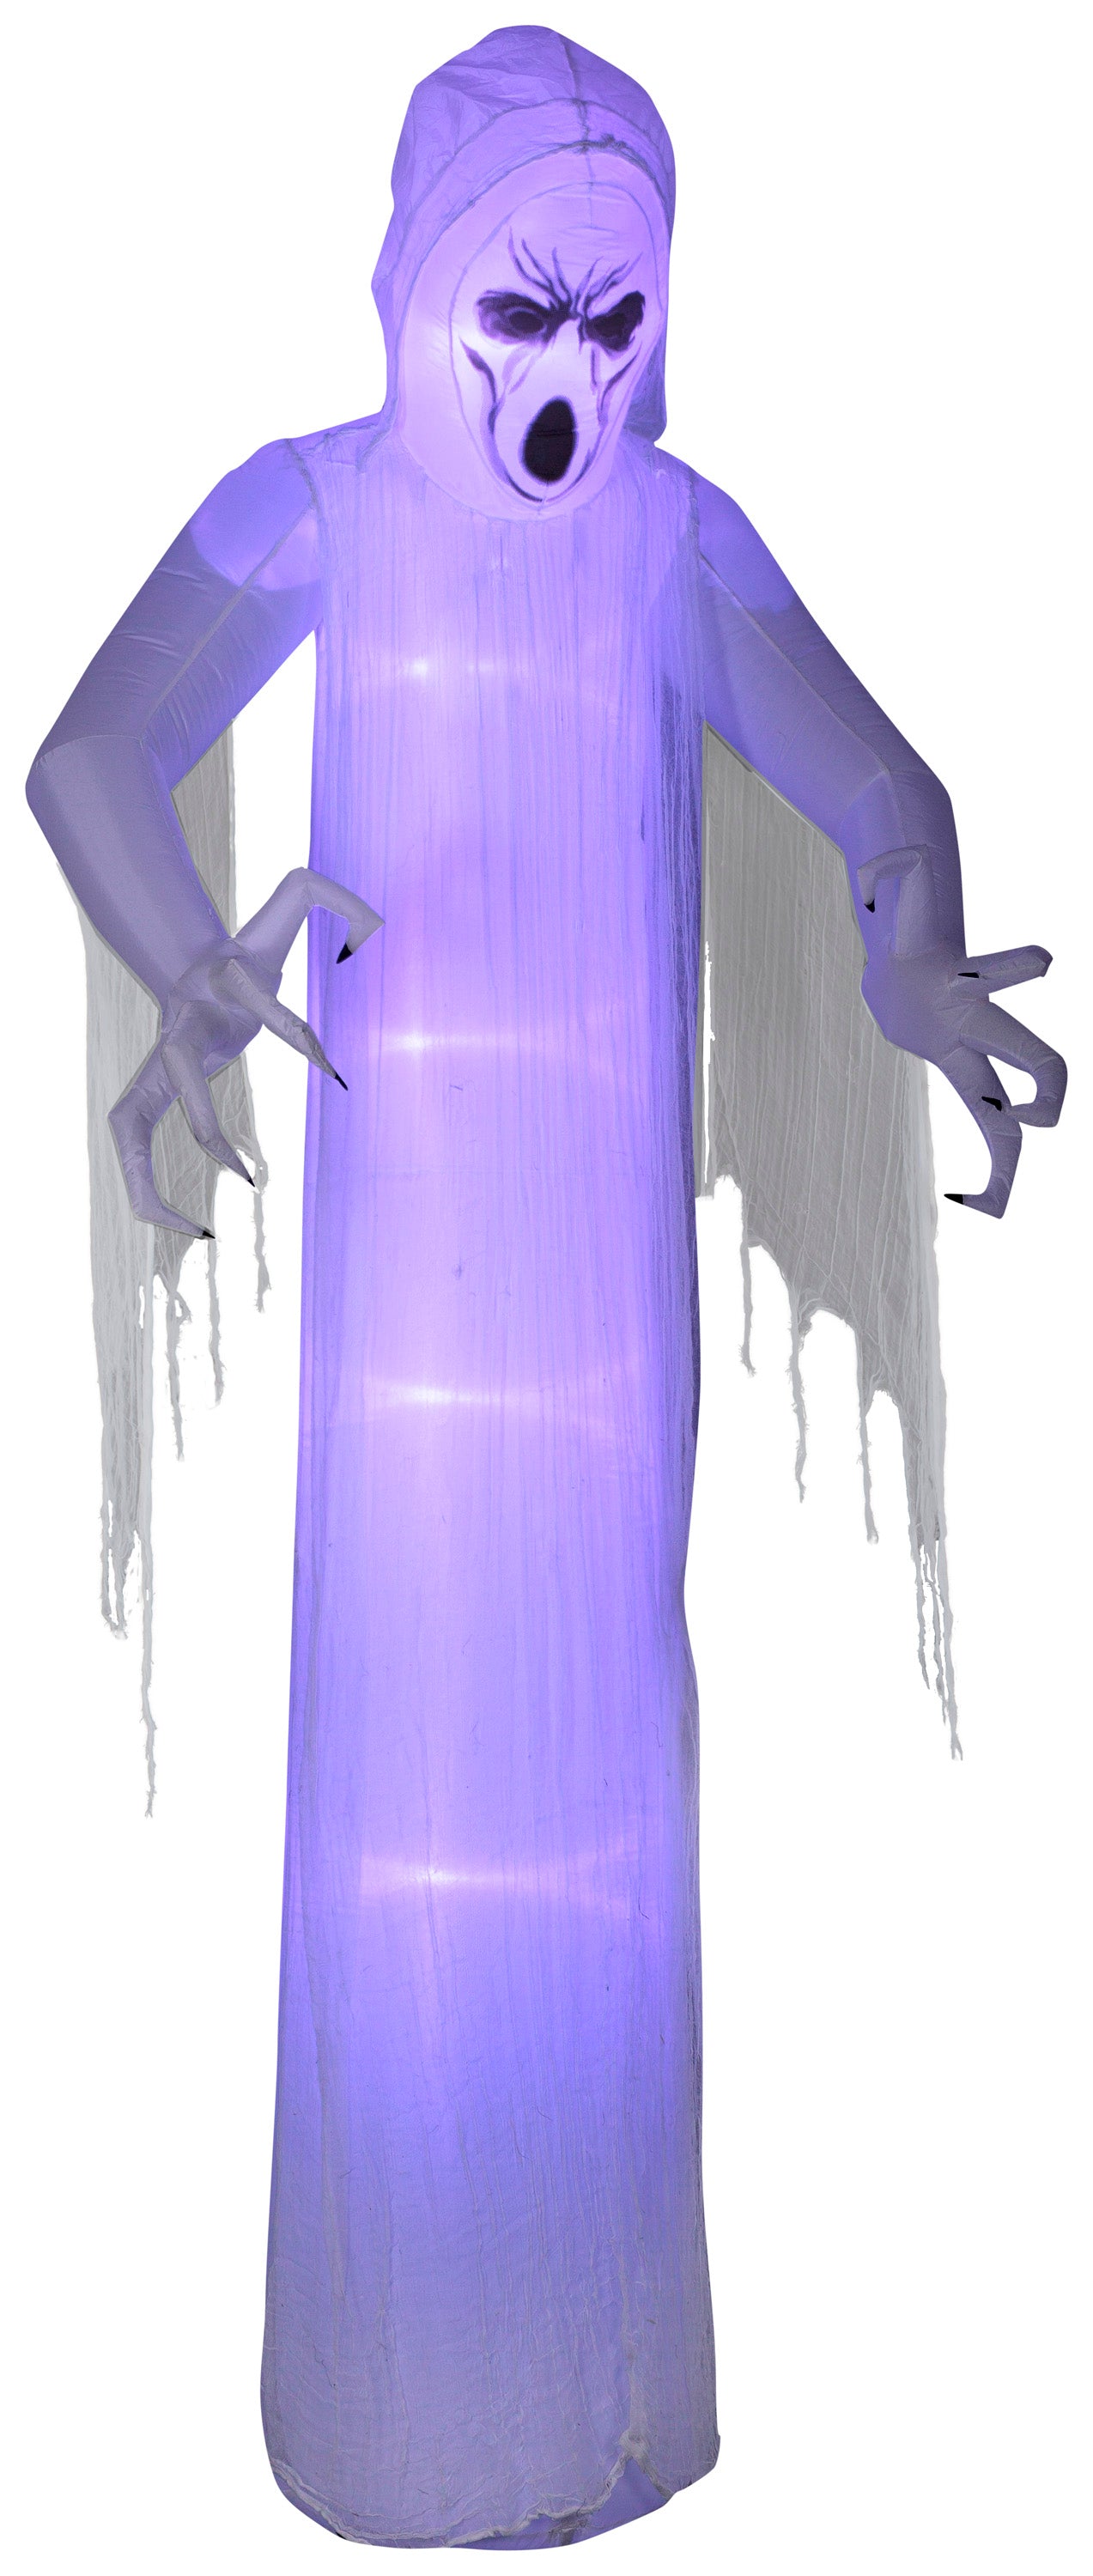 12' Lightshow Airblown ShortCircuit Frightening Ghost w/ Gauze Halloween Inflatable